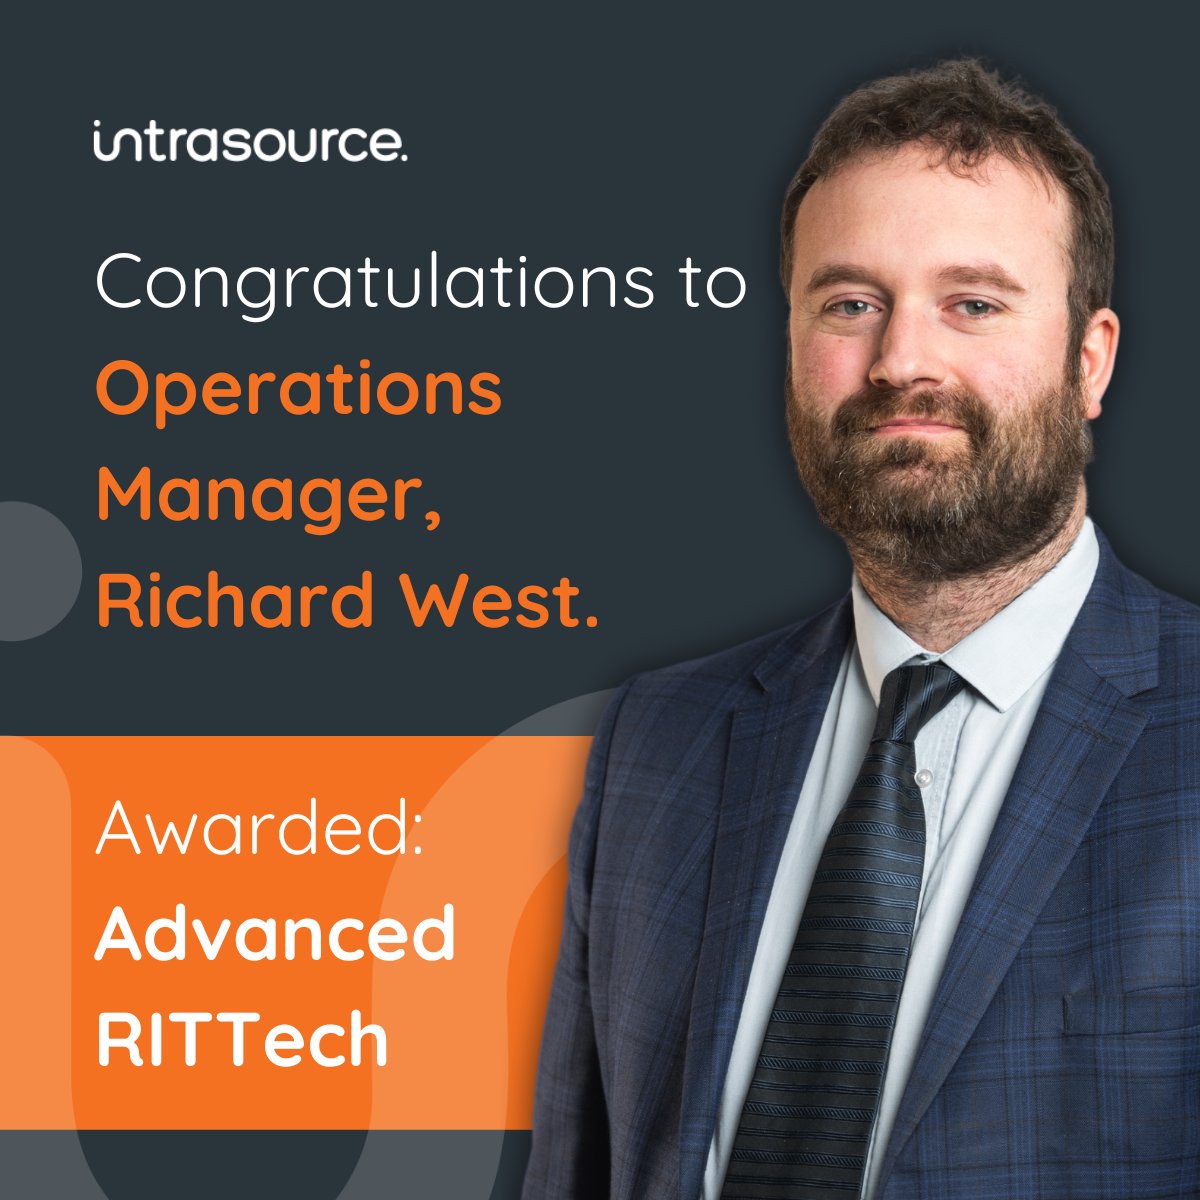 Congratulations to our Operations Manager, Richard West, for achieving Advanced RITTech certification, marking a significant step towards chartered registration. Well done, Richard! Onwards and upwards from here. 🎉👏